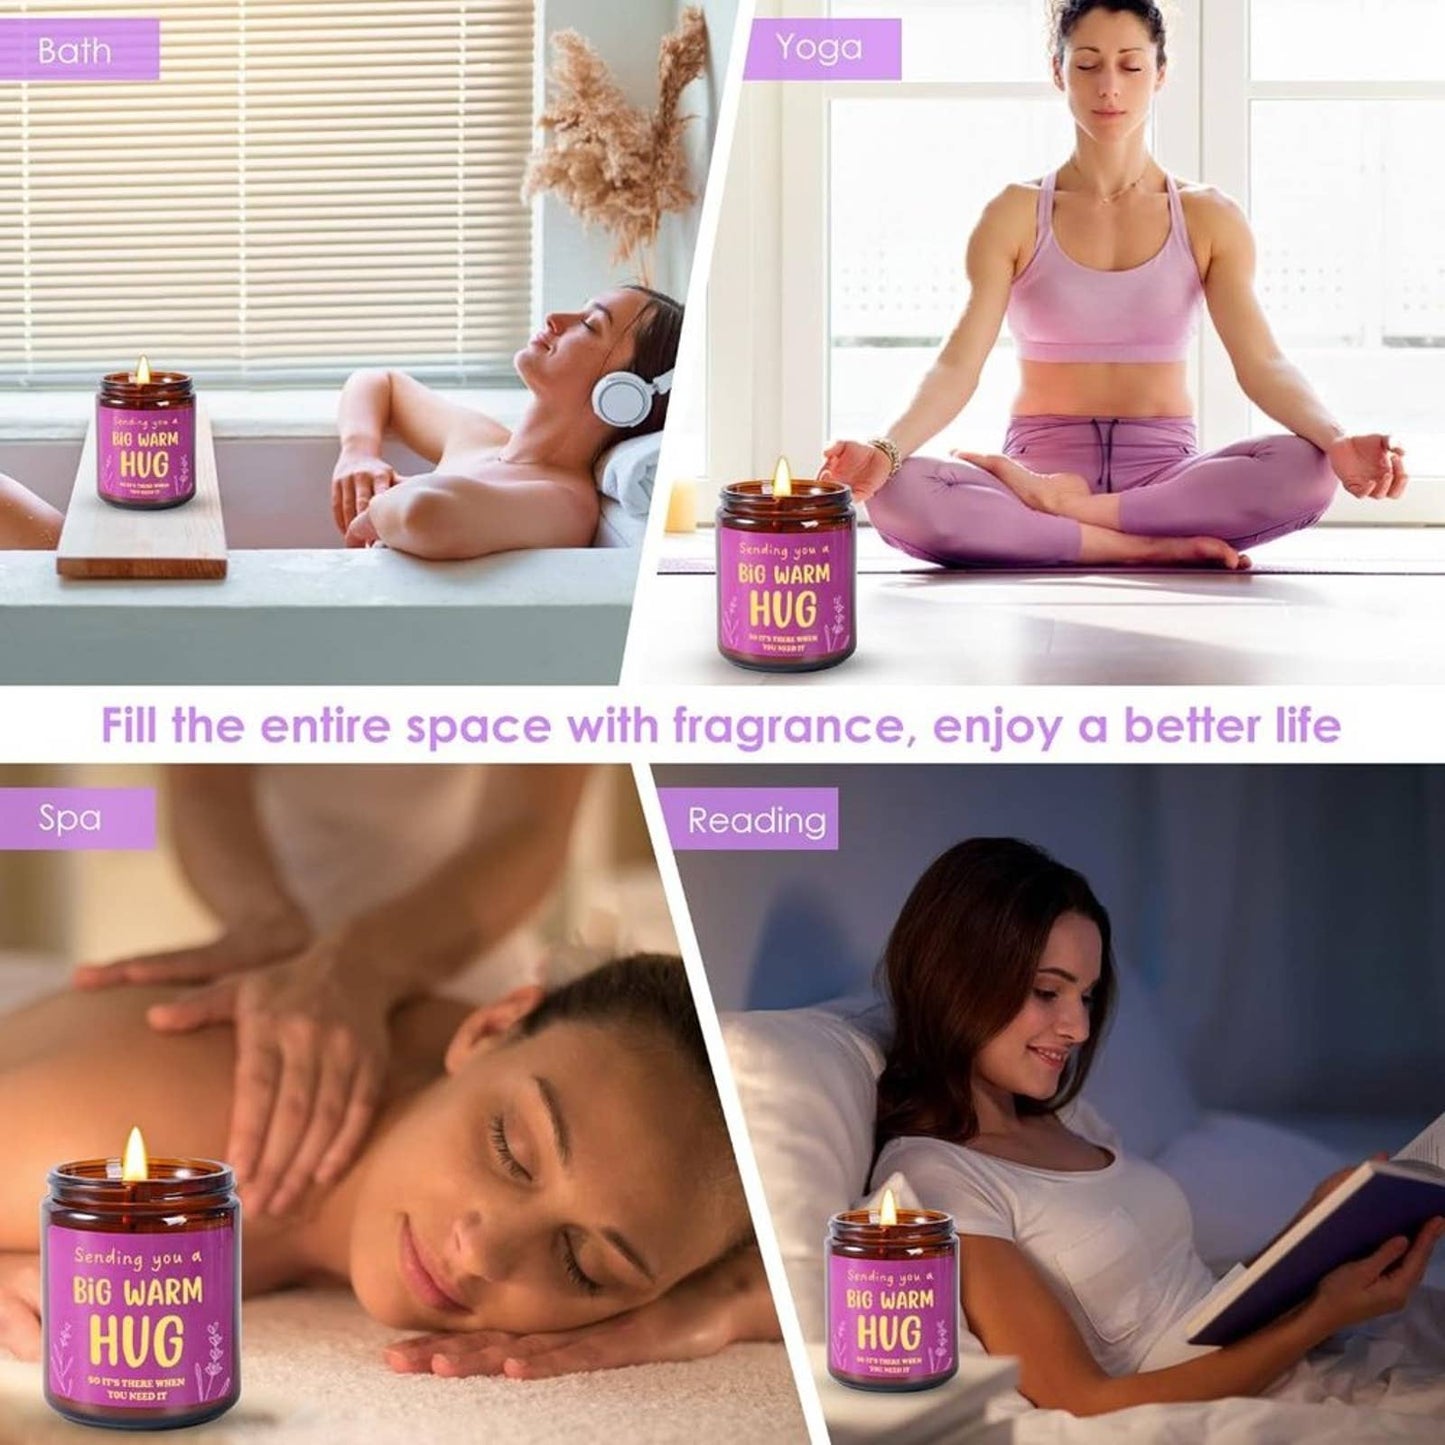 BdayPtion Thinking of You Gifts for Women, Feel Better Get Well Relaxing Candle